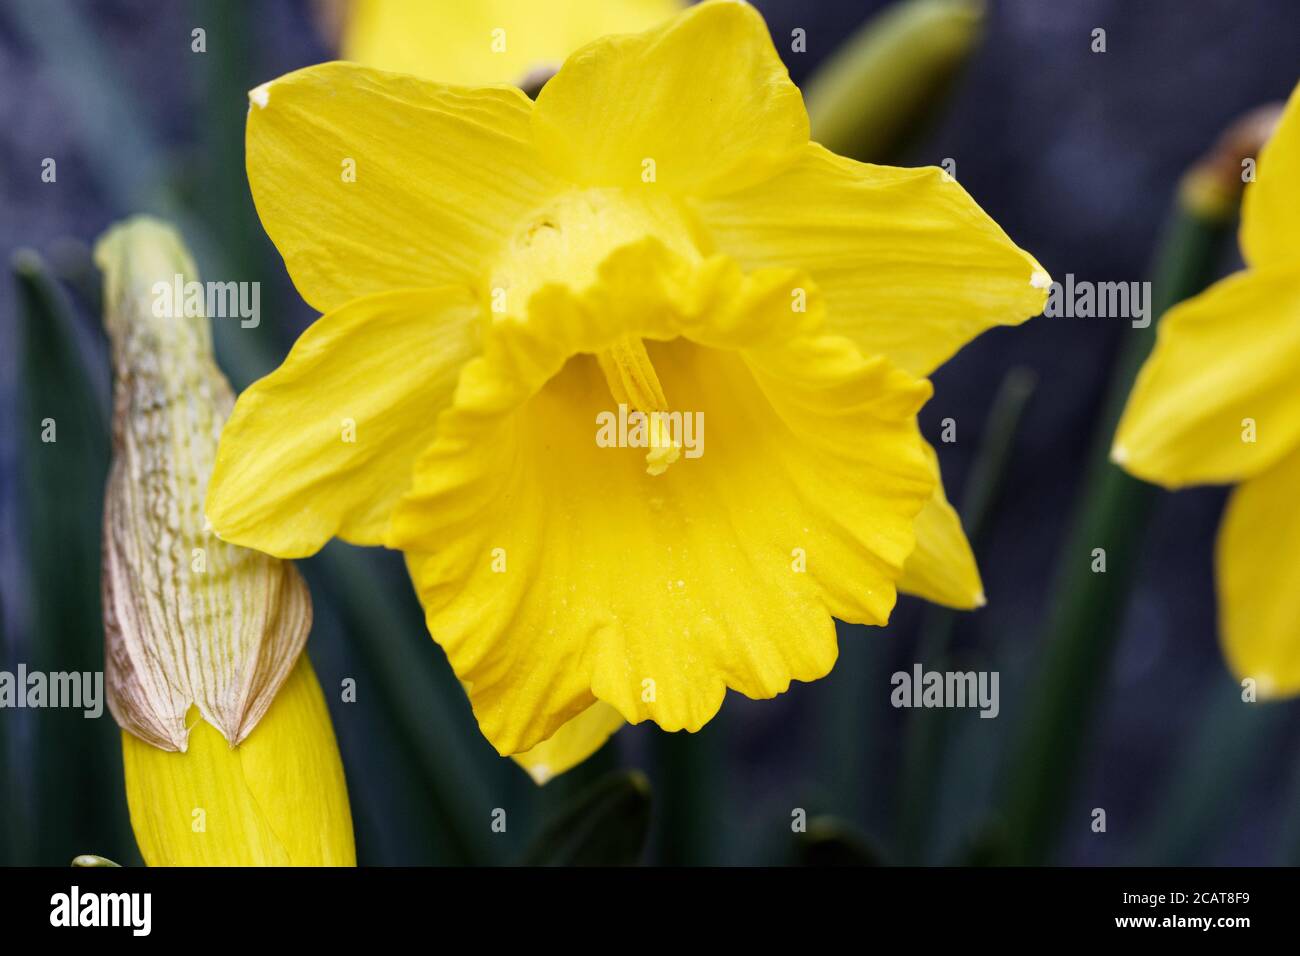 Narcissus is a genus of predominantly spring flowering perennial plants of the amaryllis family, Amaryllidaceae. Stock Photo